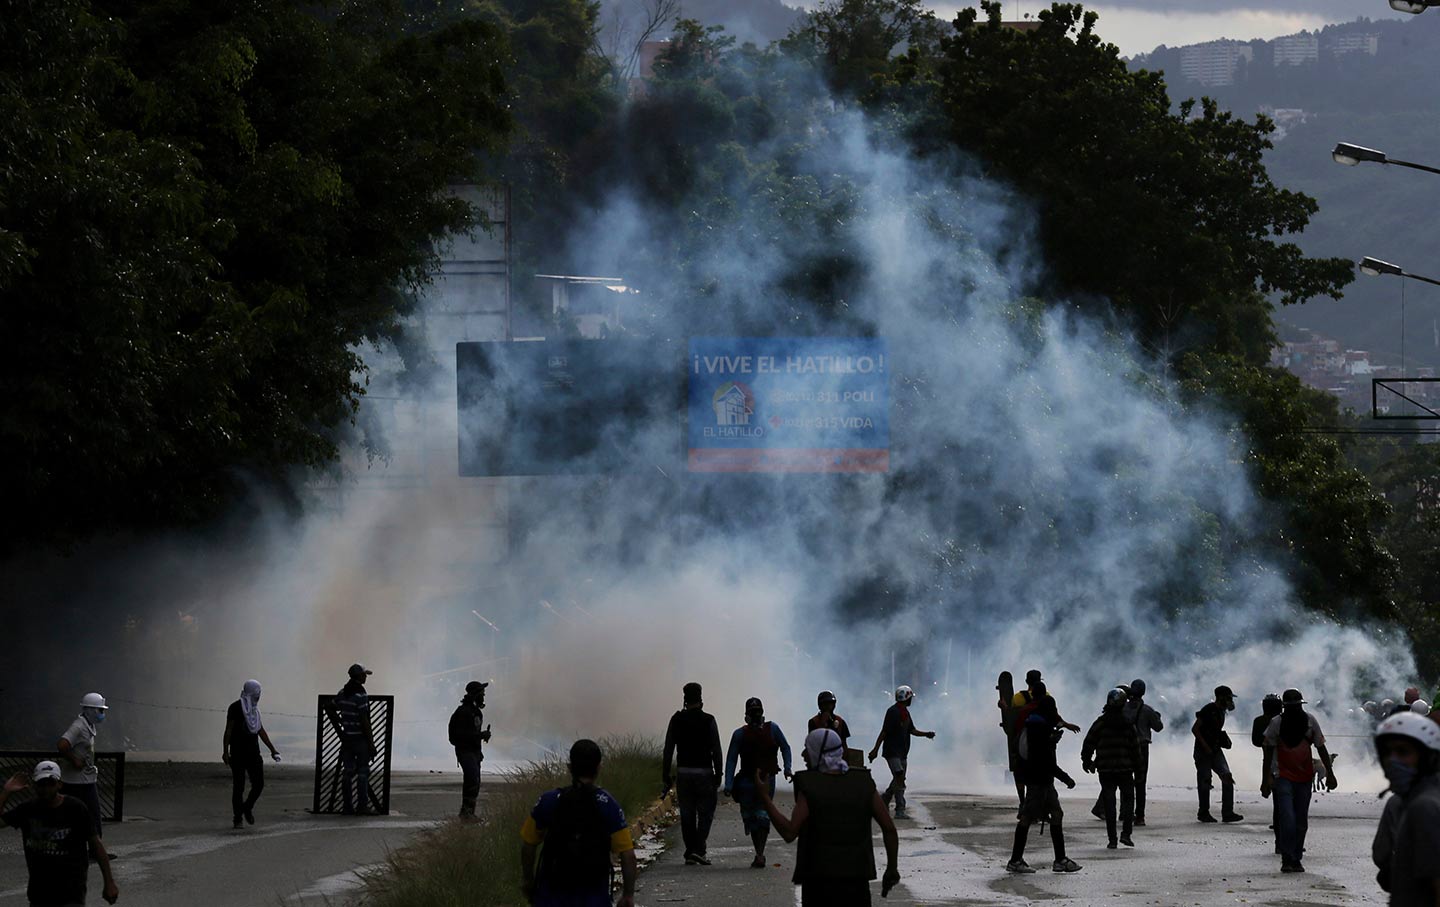 Demonstrators walk amid tear gas fired by Bolivarian National Guards on the outskirts of Caracas, Venezuela on July 20, 2017.